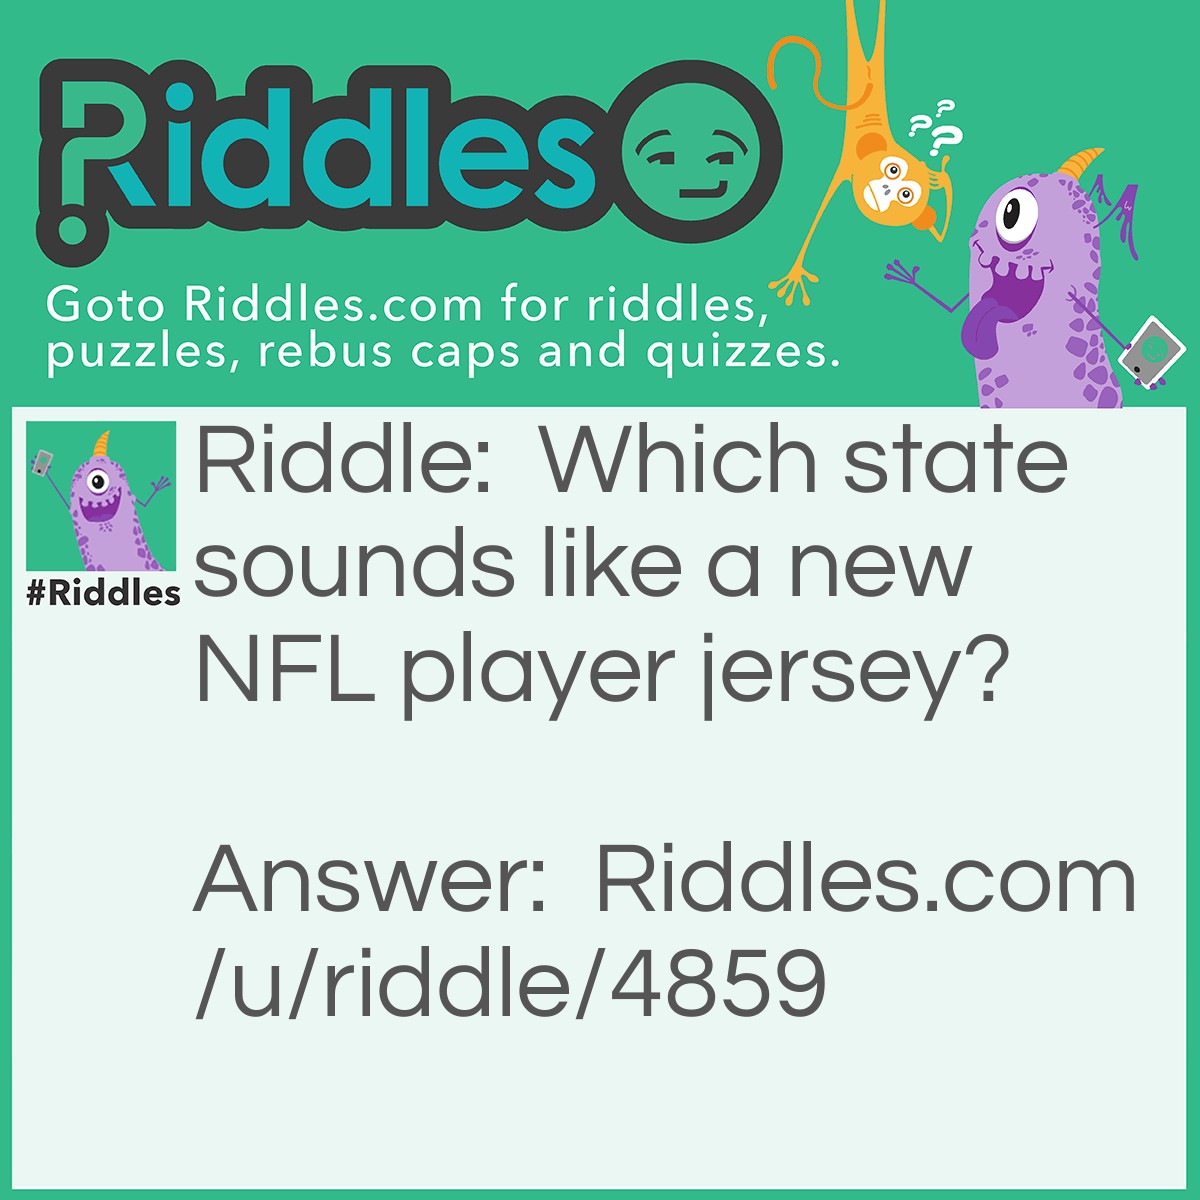 Riddle: Which state sounds like a new NFL player jersey? Answer: New Jersey.